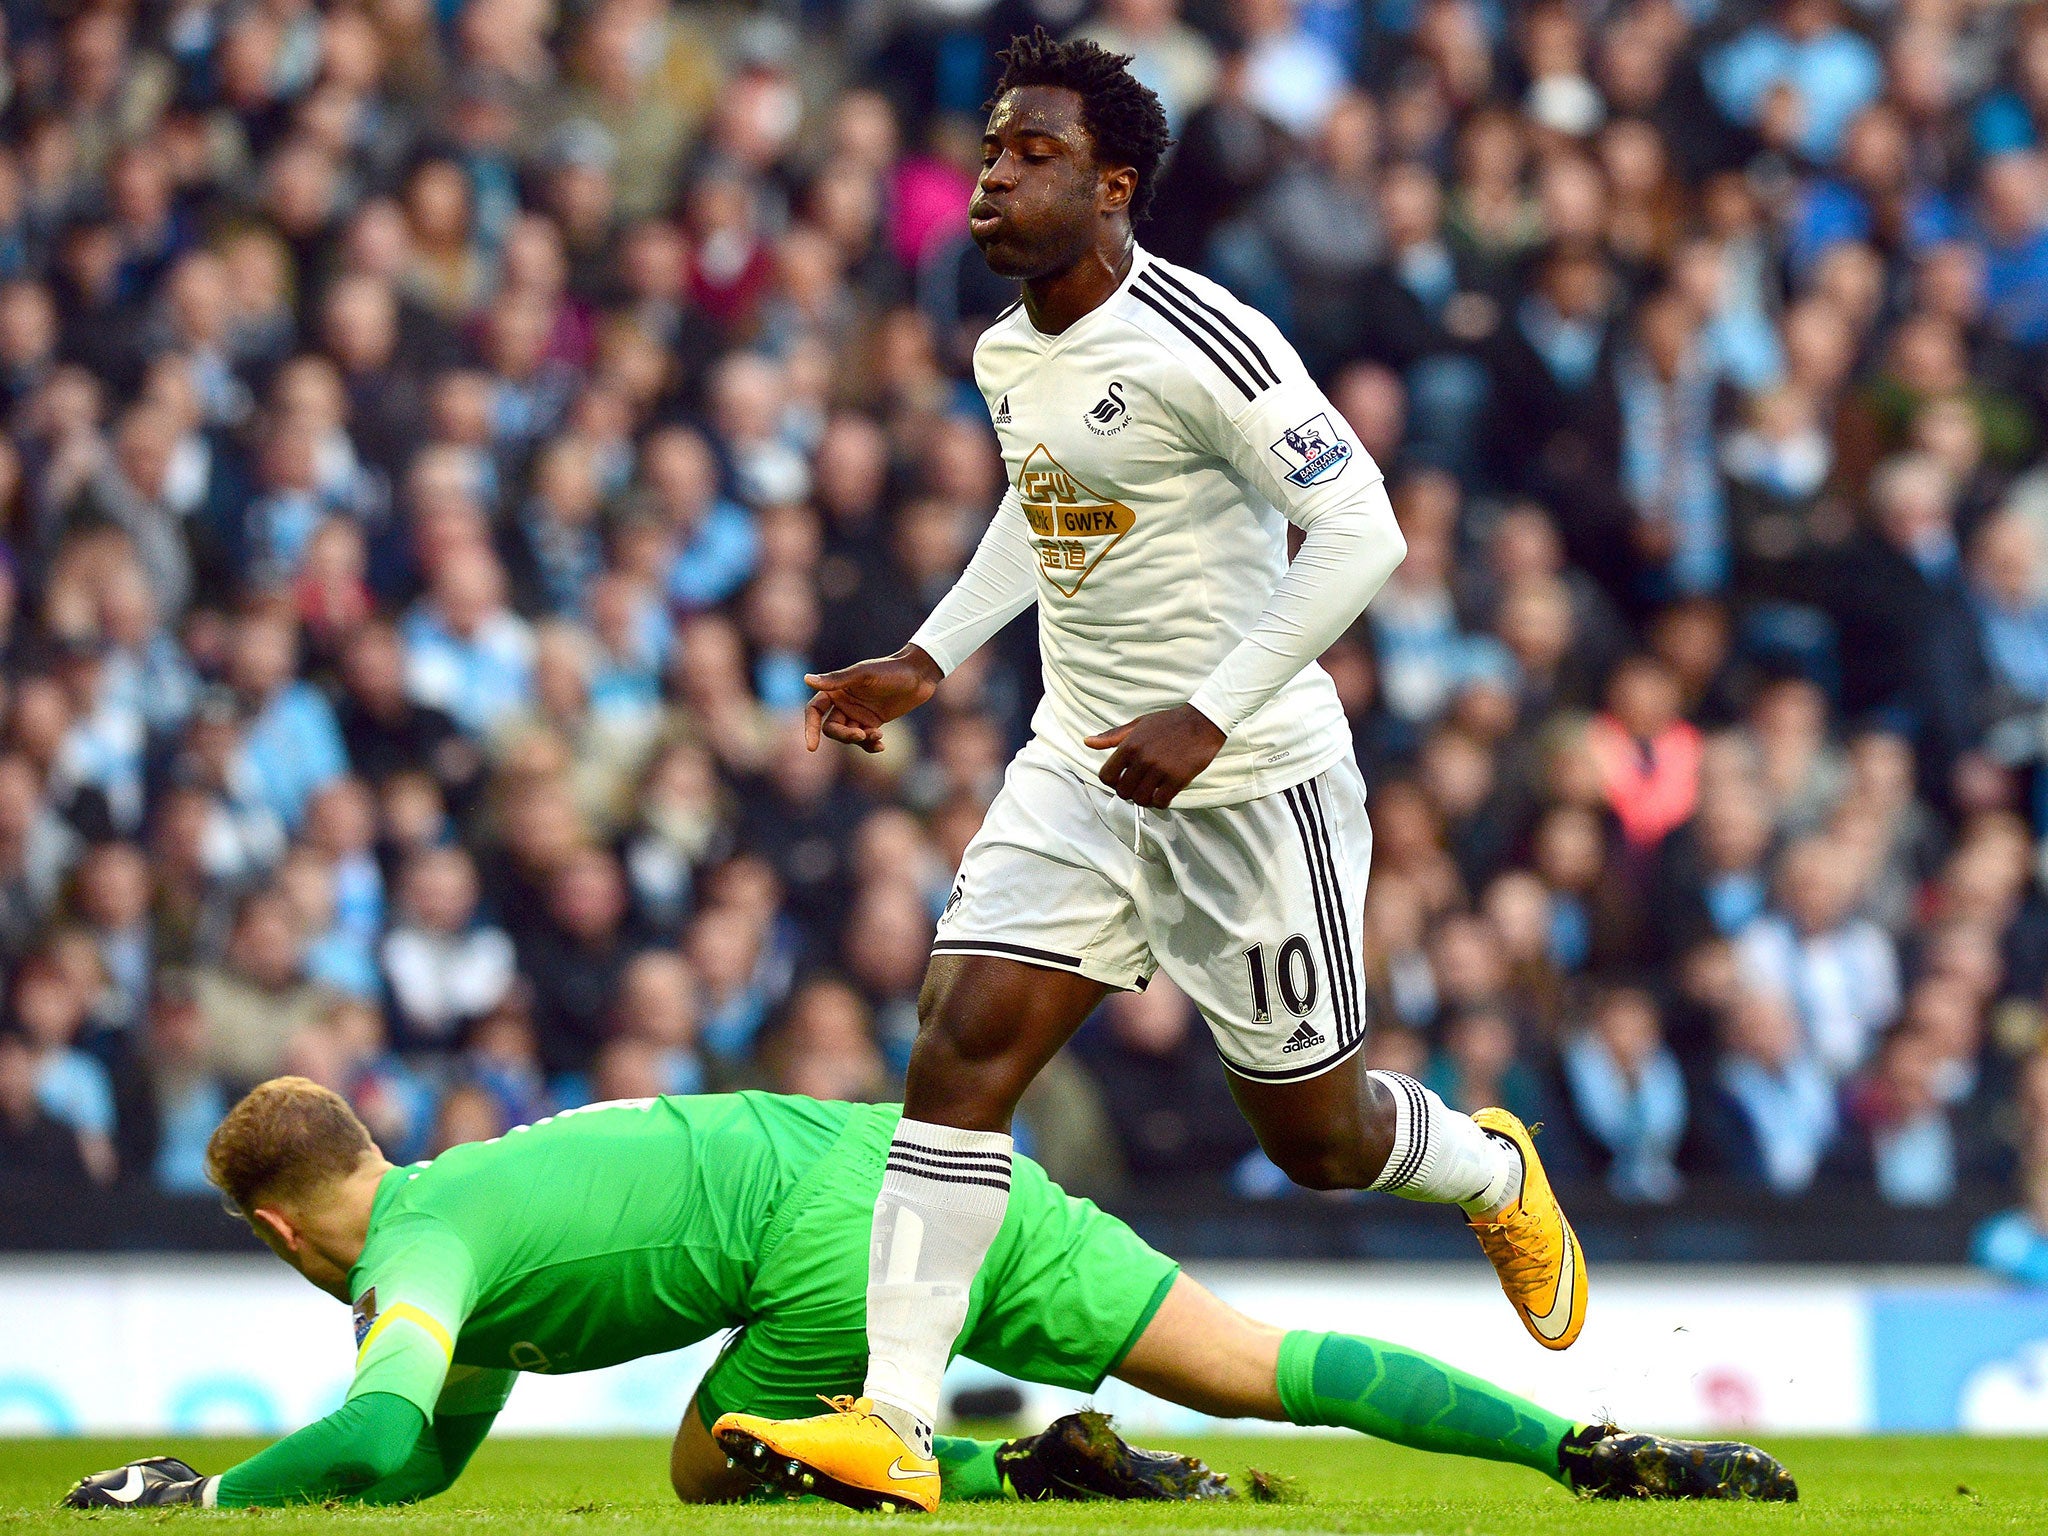 Wilfried Bony is expected to feature against QPR